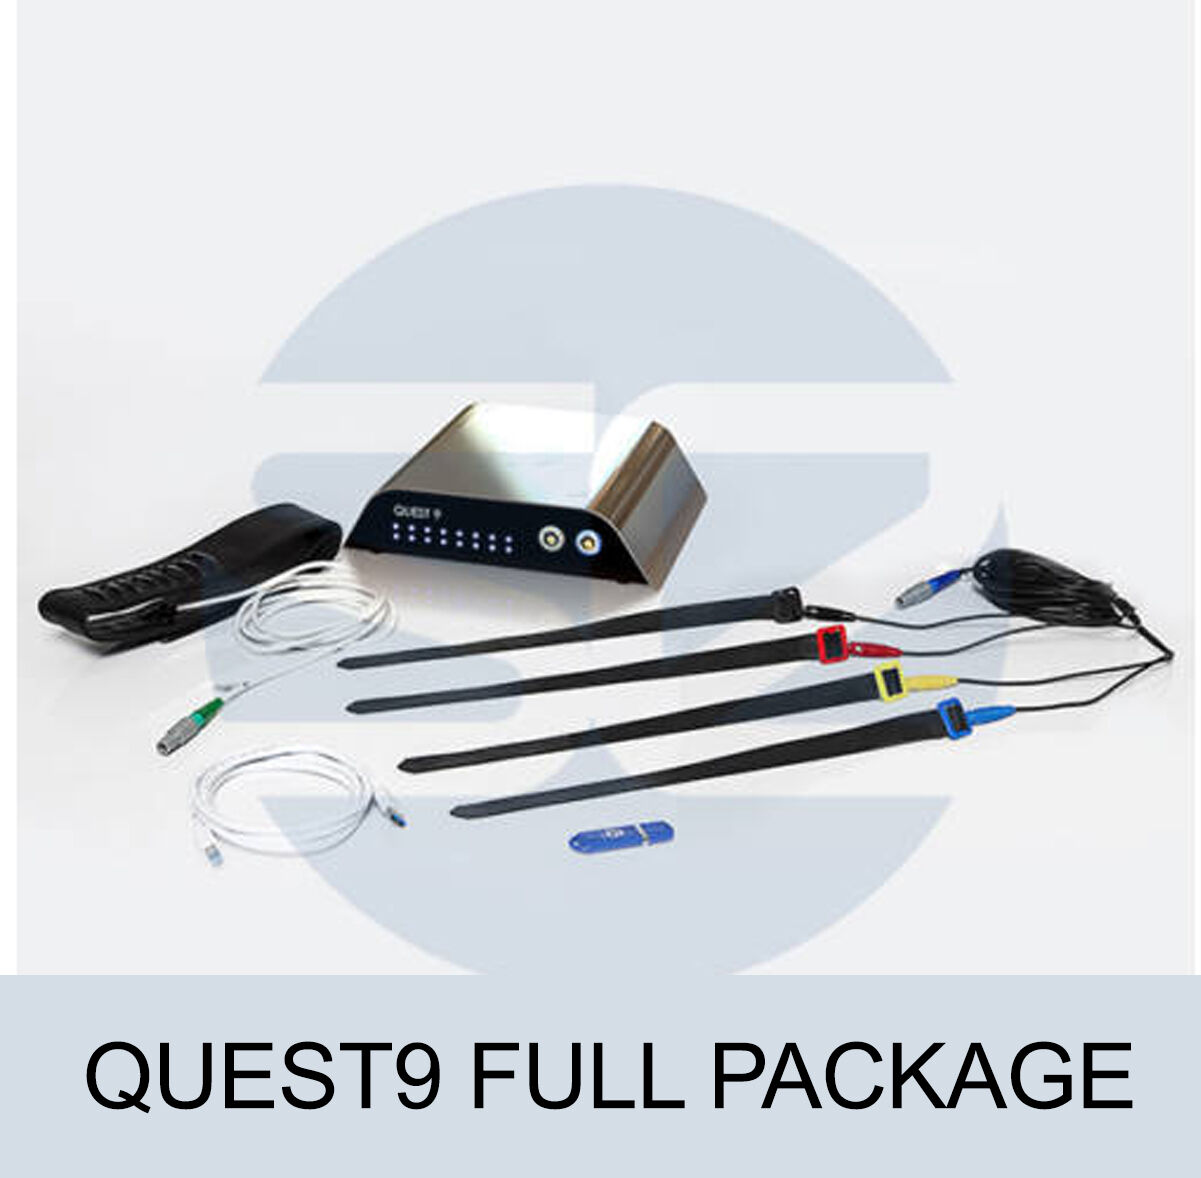 QUEST9 Full Package